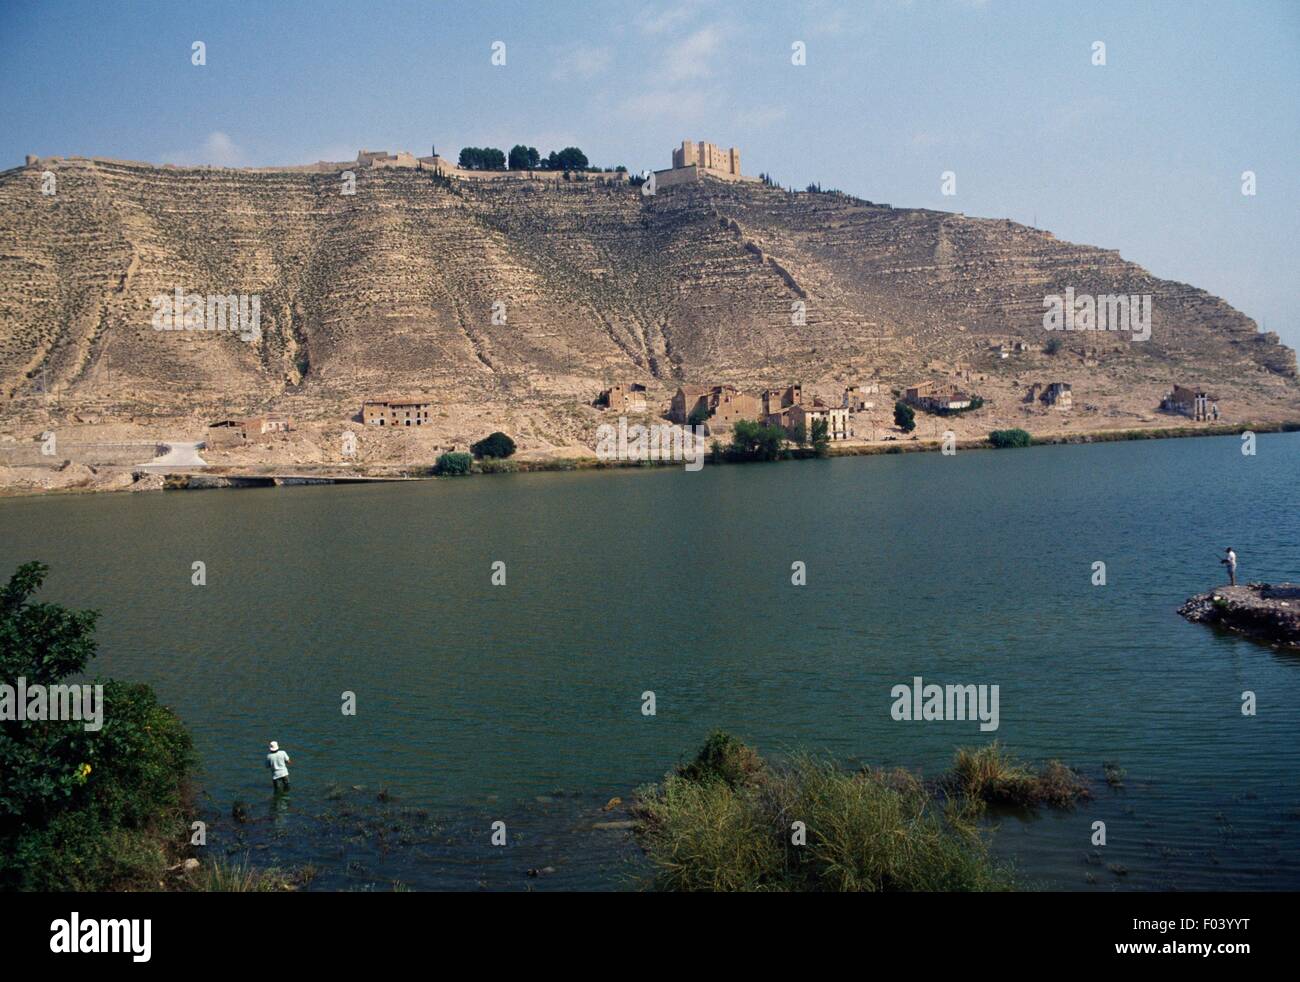 Artificial lake formed when the Ebro river was dammed, Mequinenza, Aragon, Spain. Stock Photo